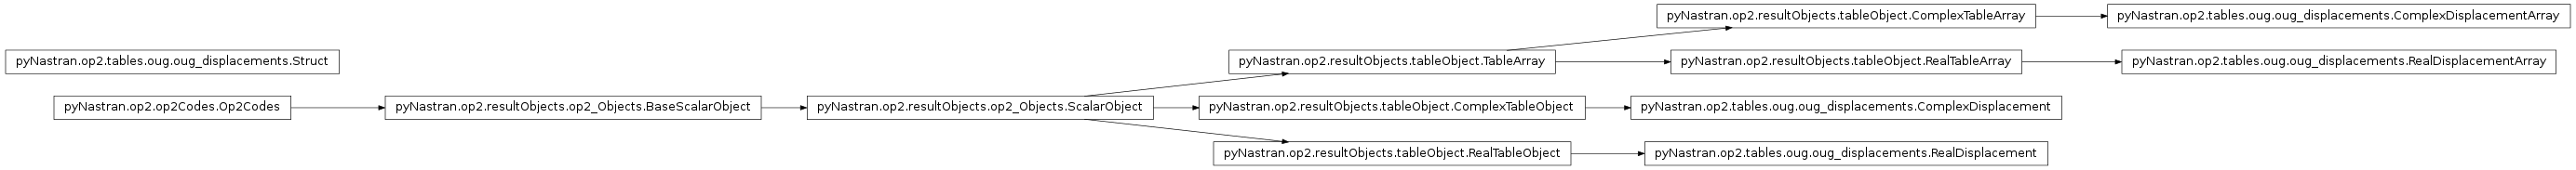 Inheritance diagram of pyNastran.op2.tables.oug.oug_displacements